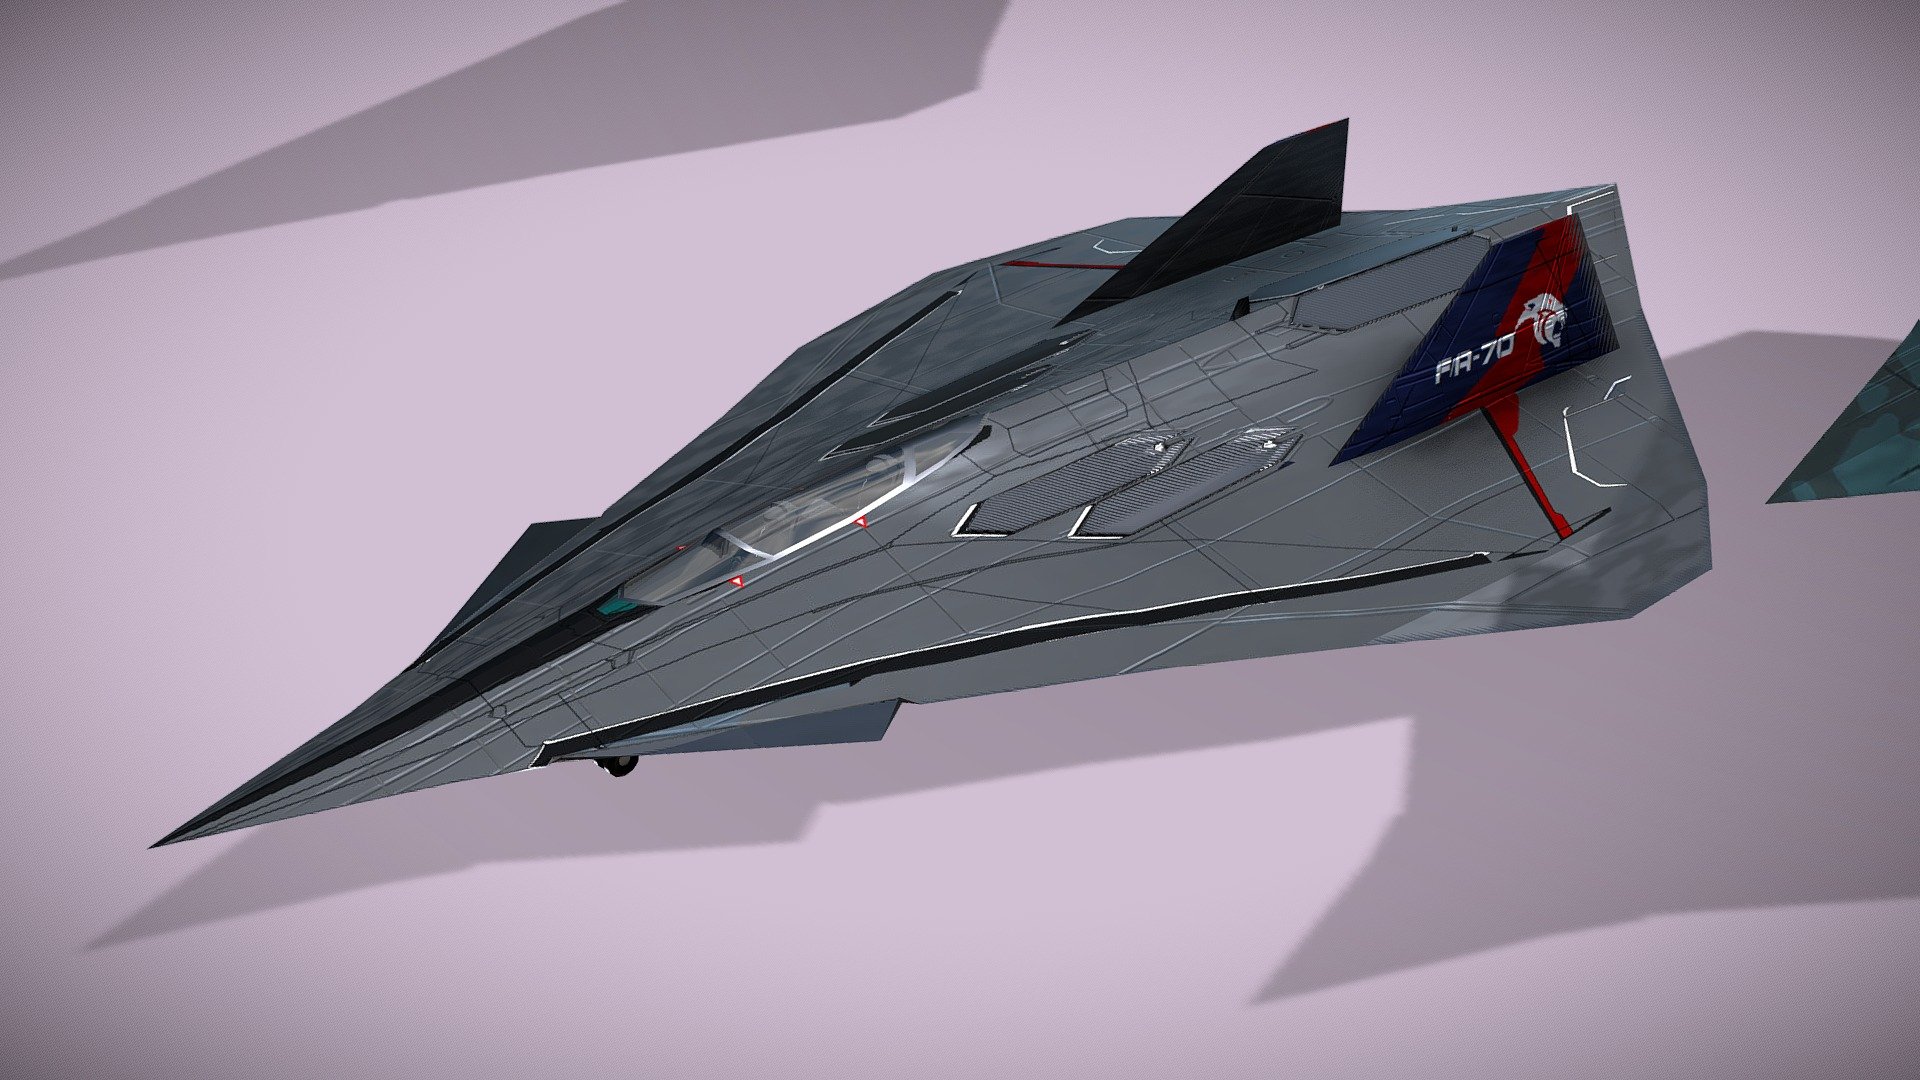 Lockheed EFX-70 Panther 2

Lowpoly model of american air superiority fighter concept



EFX-70 Panther 2 is multirole combat aircraft designed by Deviantart artist Bagera3005. Scramjet engines allow to achieve 8,6 Mach speed and supercruise at 3,4 Mach. This speed can be achieved at suborbital altitudes. 2 mini rudders are extracting for under Mach1 manouvers. 3 internal weapon bays can hold air-to-air and air-to-ground missiles. 



1 standing version with wheels and 2 flying versions with trails, afterburner, pilot and armament.

Model has bump map, roughness map and 3 x diffuse textures.

incl. STL 3D print file



Check also my other aircrafts and cars.

Patreon with monthly free model - Lockheed EFX-70 Panther 2 concept interceptor - Buy Royalty Free 3D model by NETRUNNER_pl 3d model